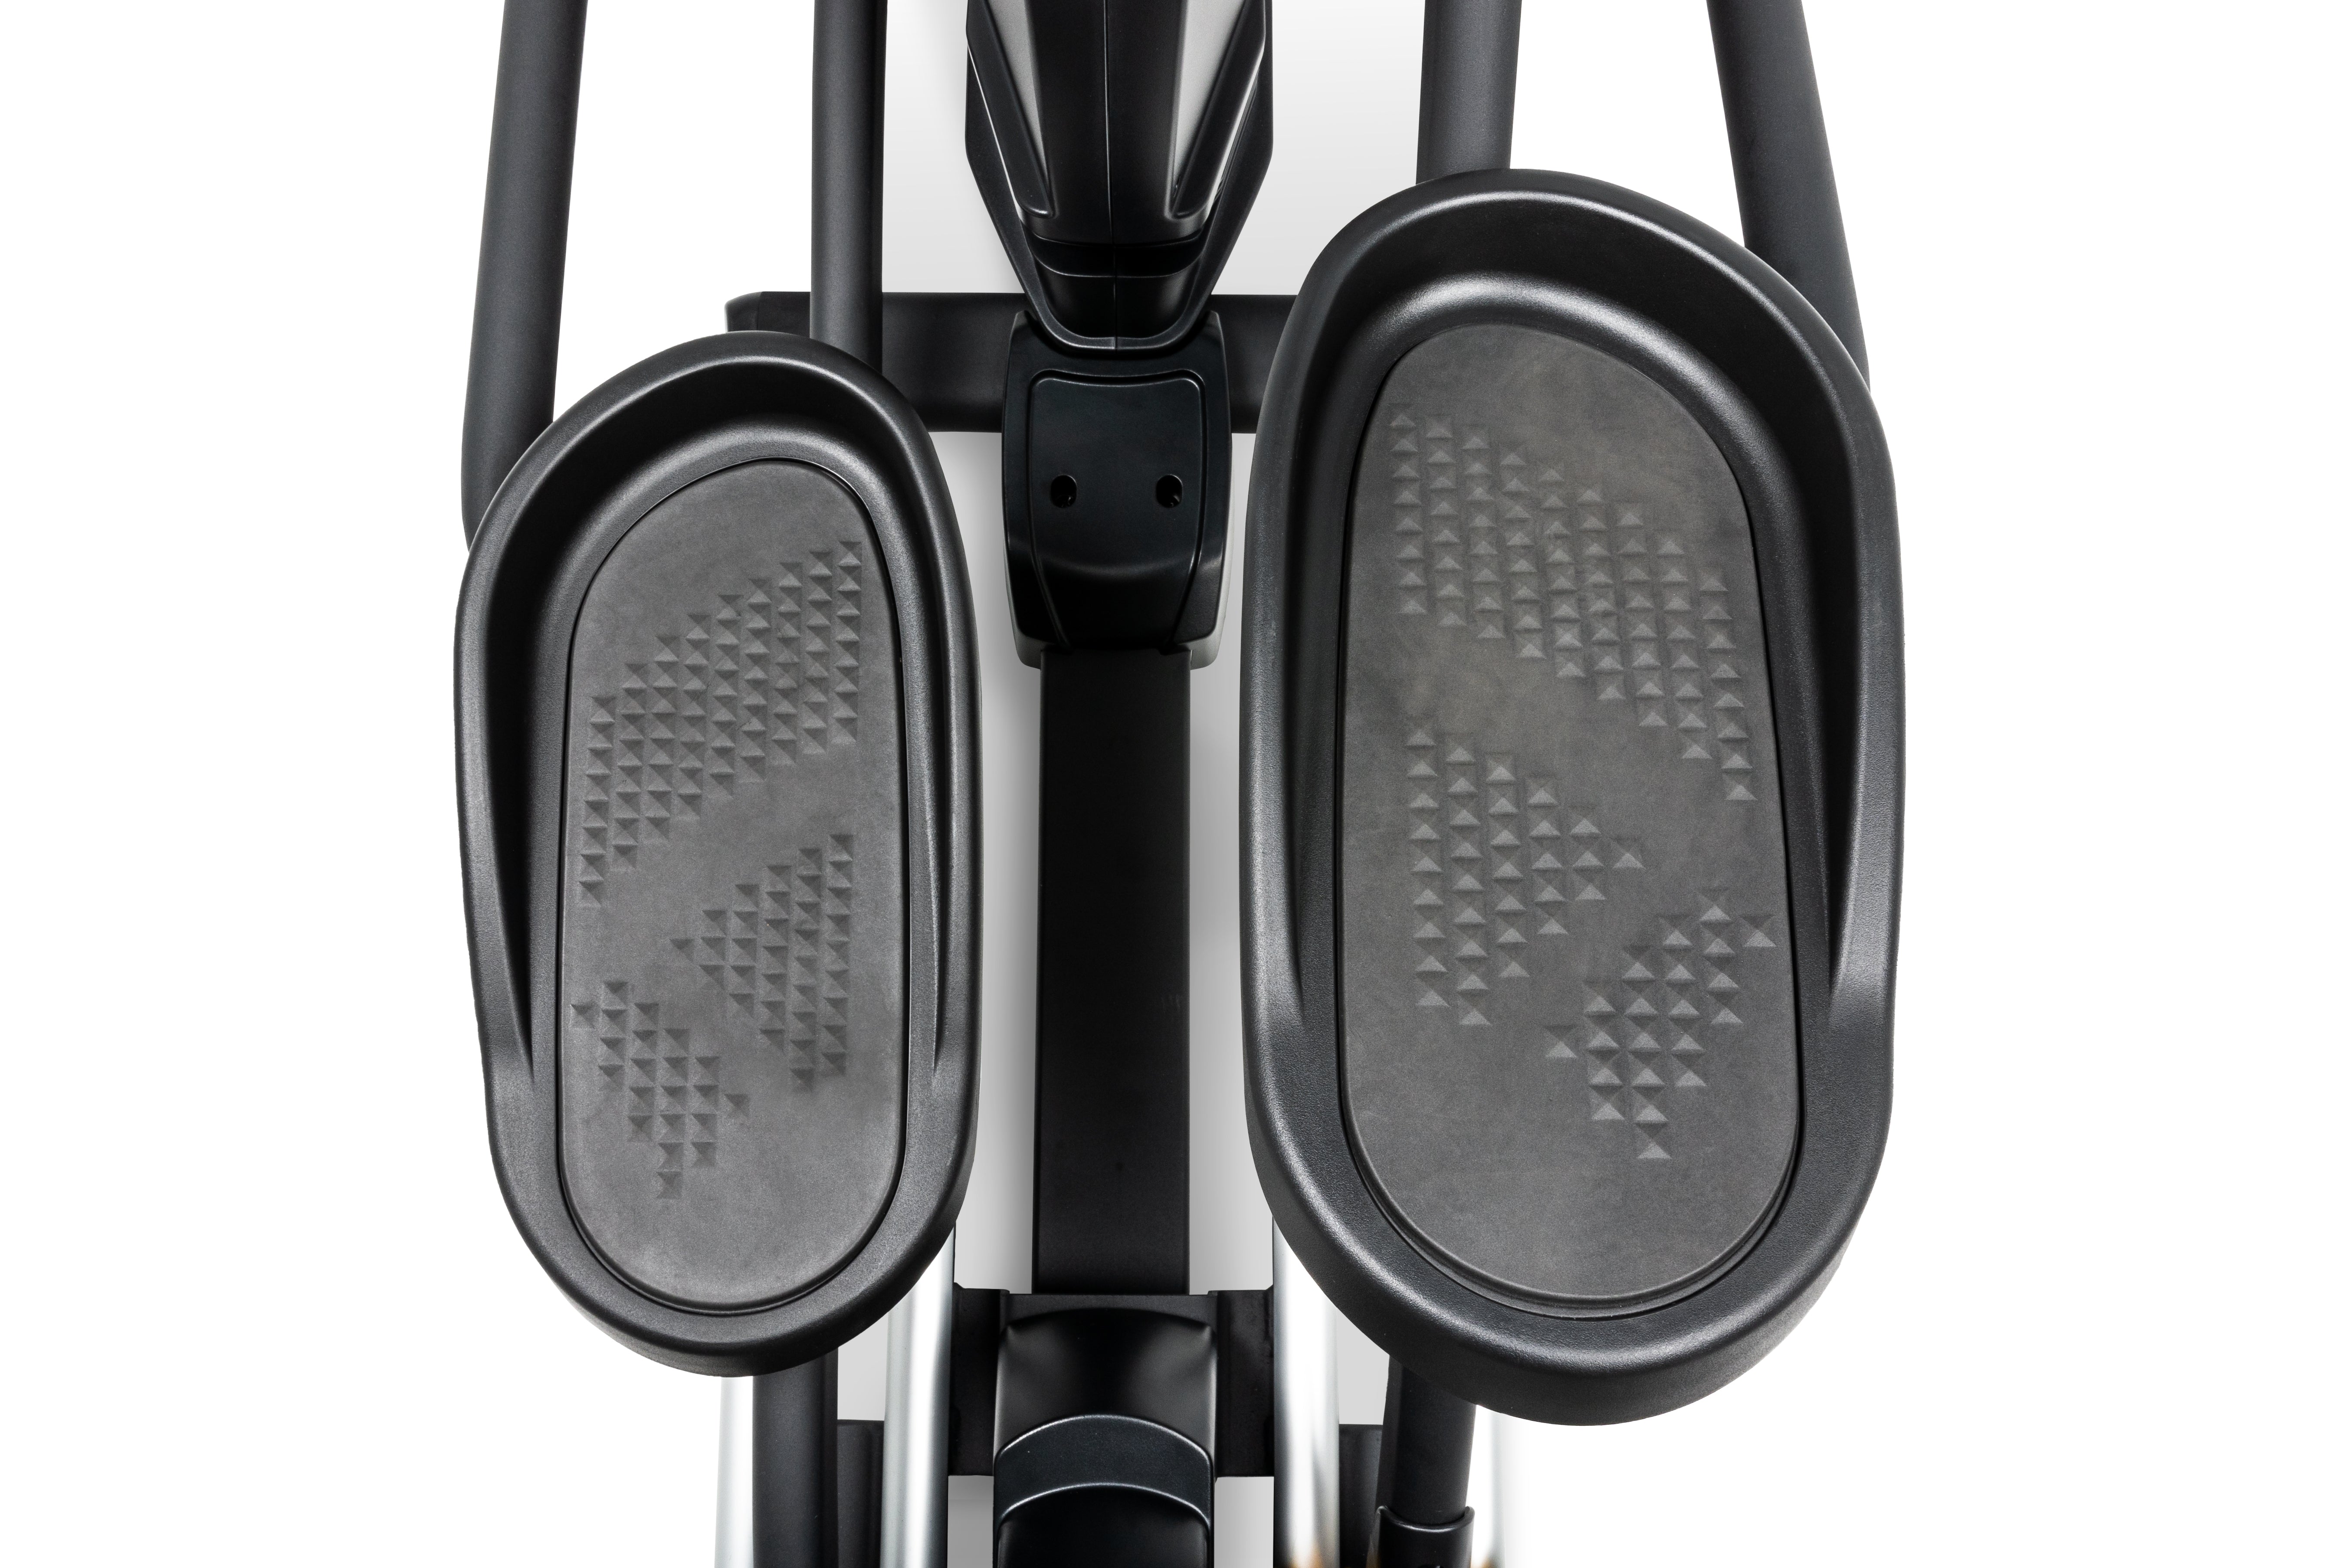 Close-up view of the Sole E95 elliptical machine's foot pedals, showcasing their textured, non-slip surface and the sturdy frame connecting them to the main unit.